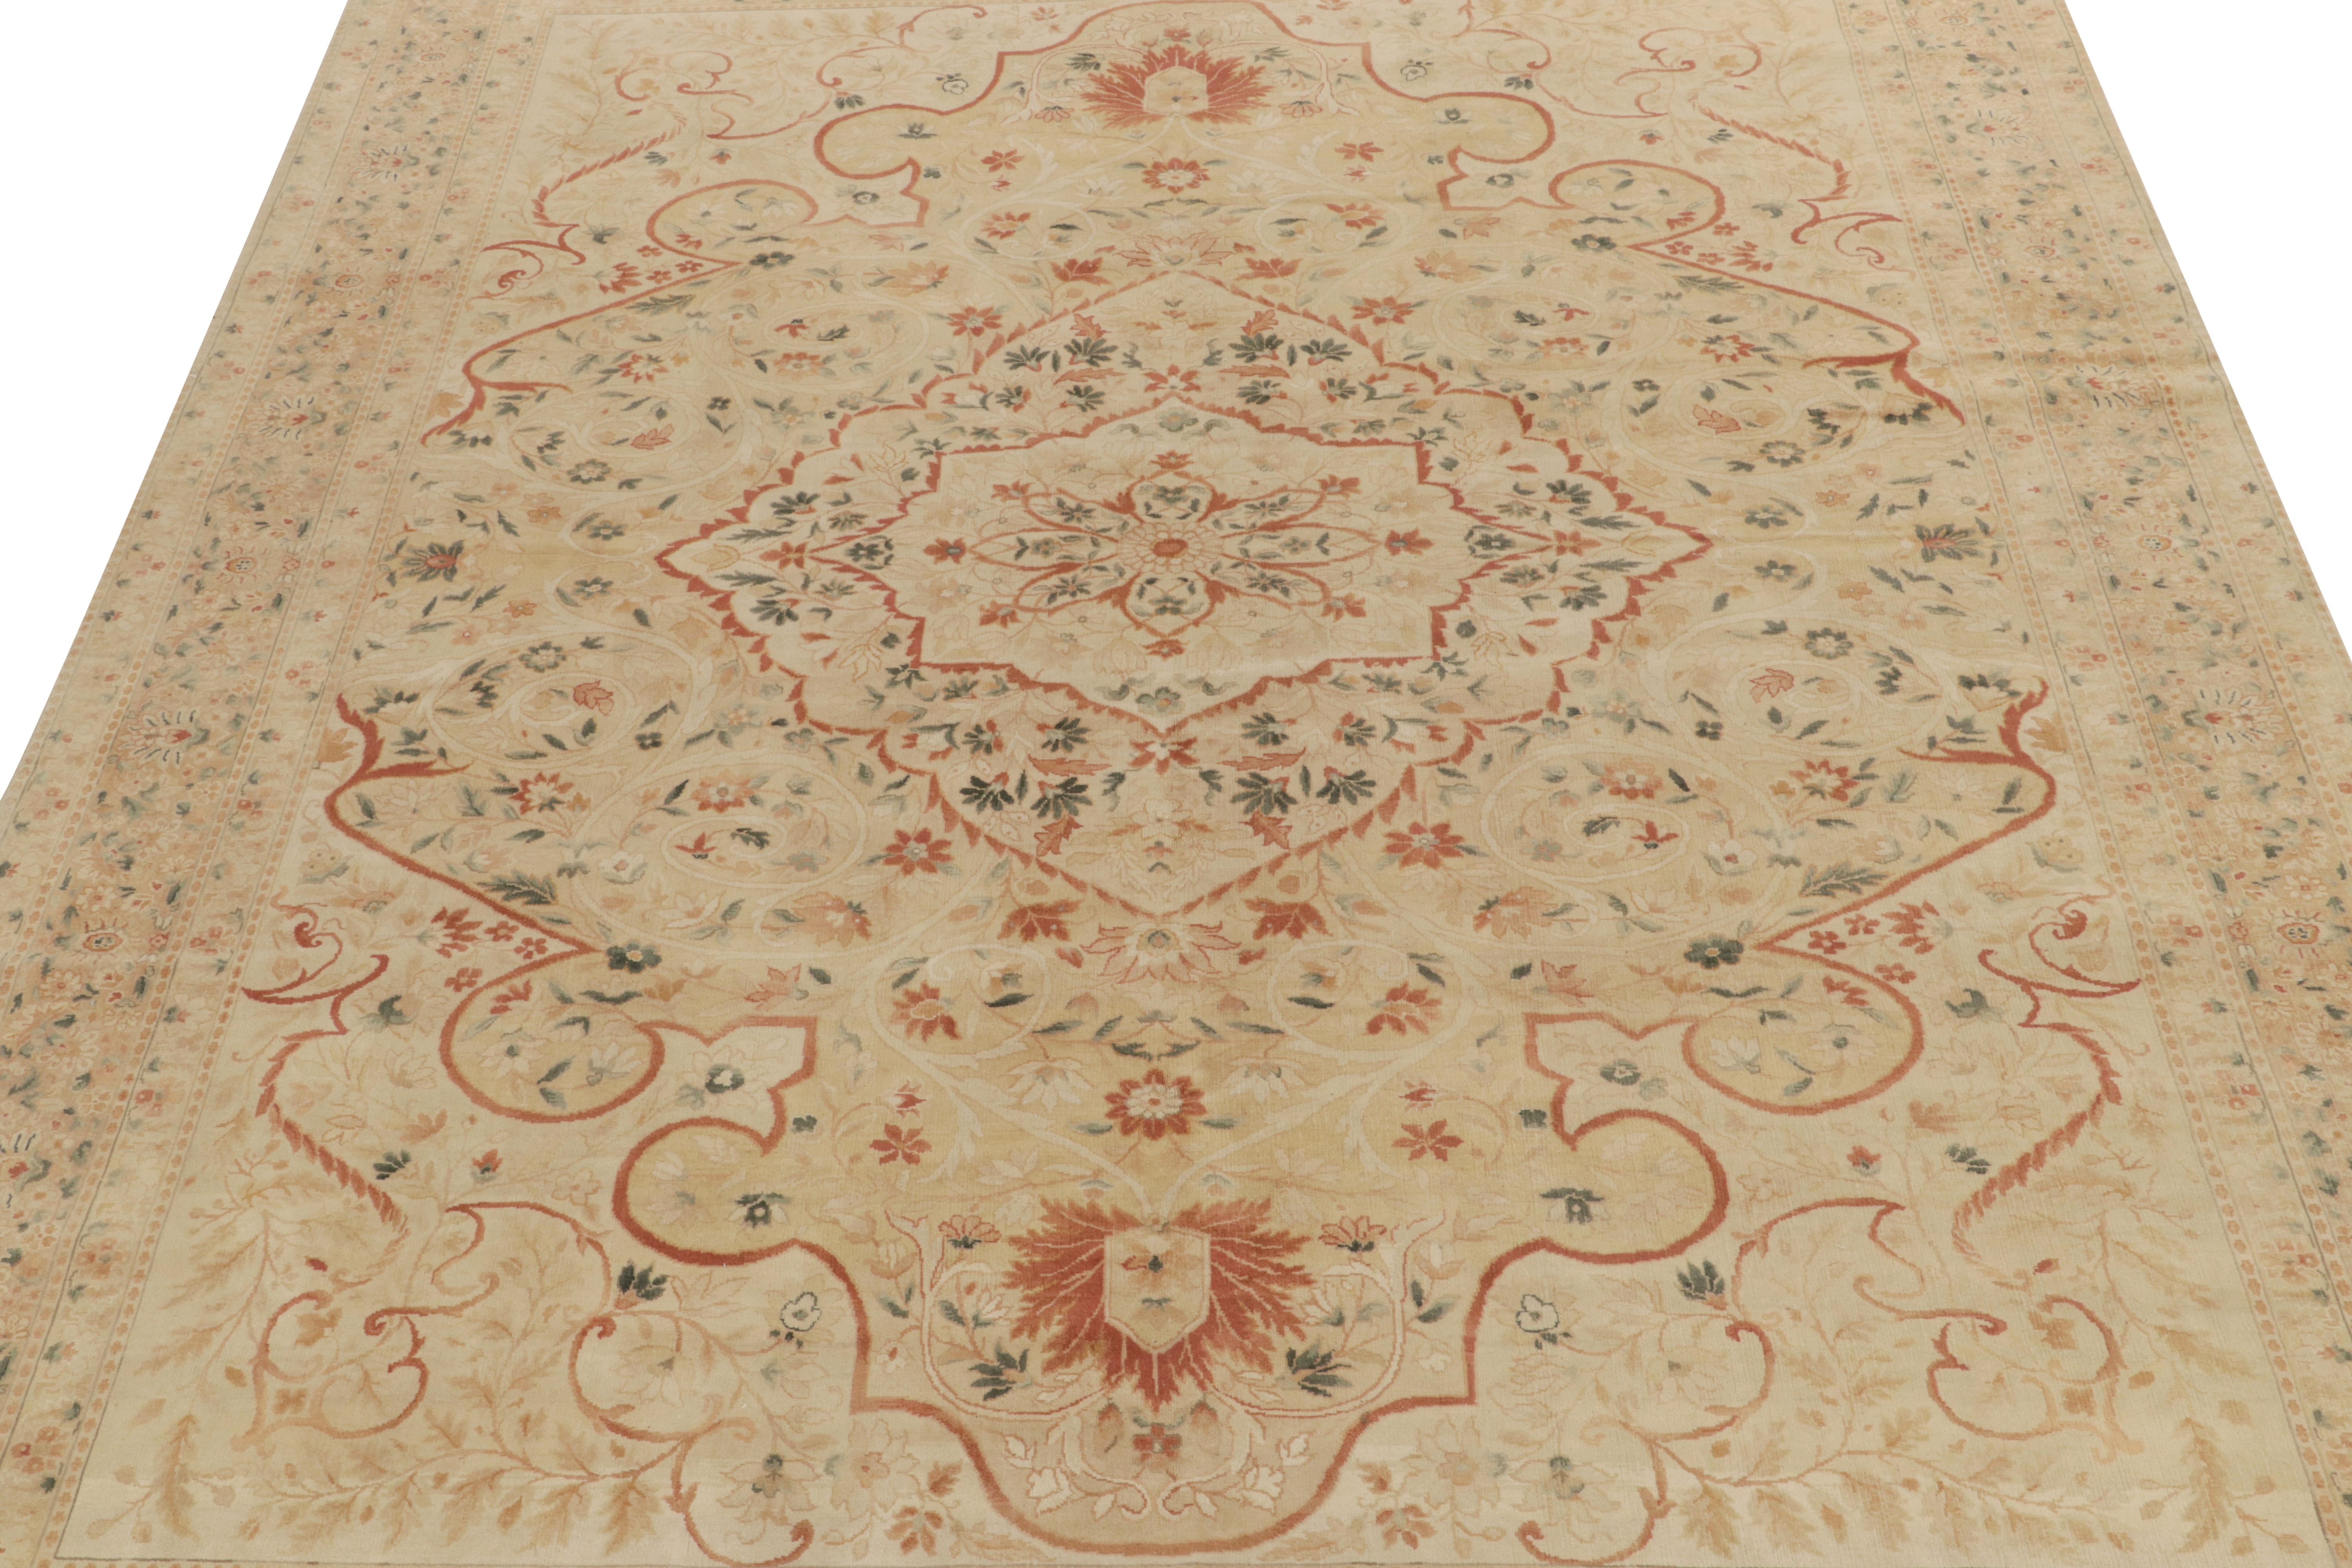 Hand-Knotted Rug & Kilim's Classic Tabriz Style Rug in Beige, Red & Green Floral Pattern For Sale